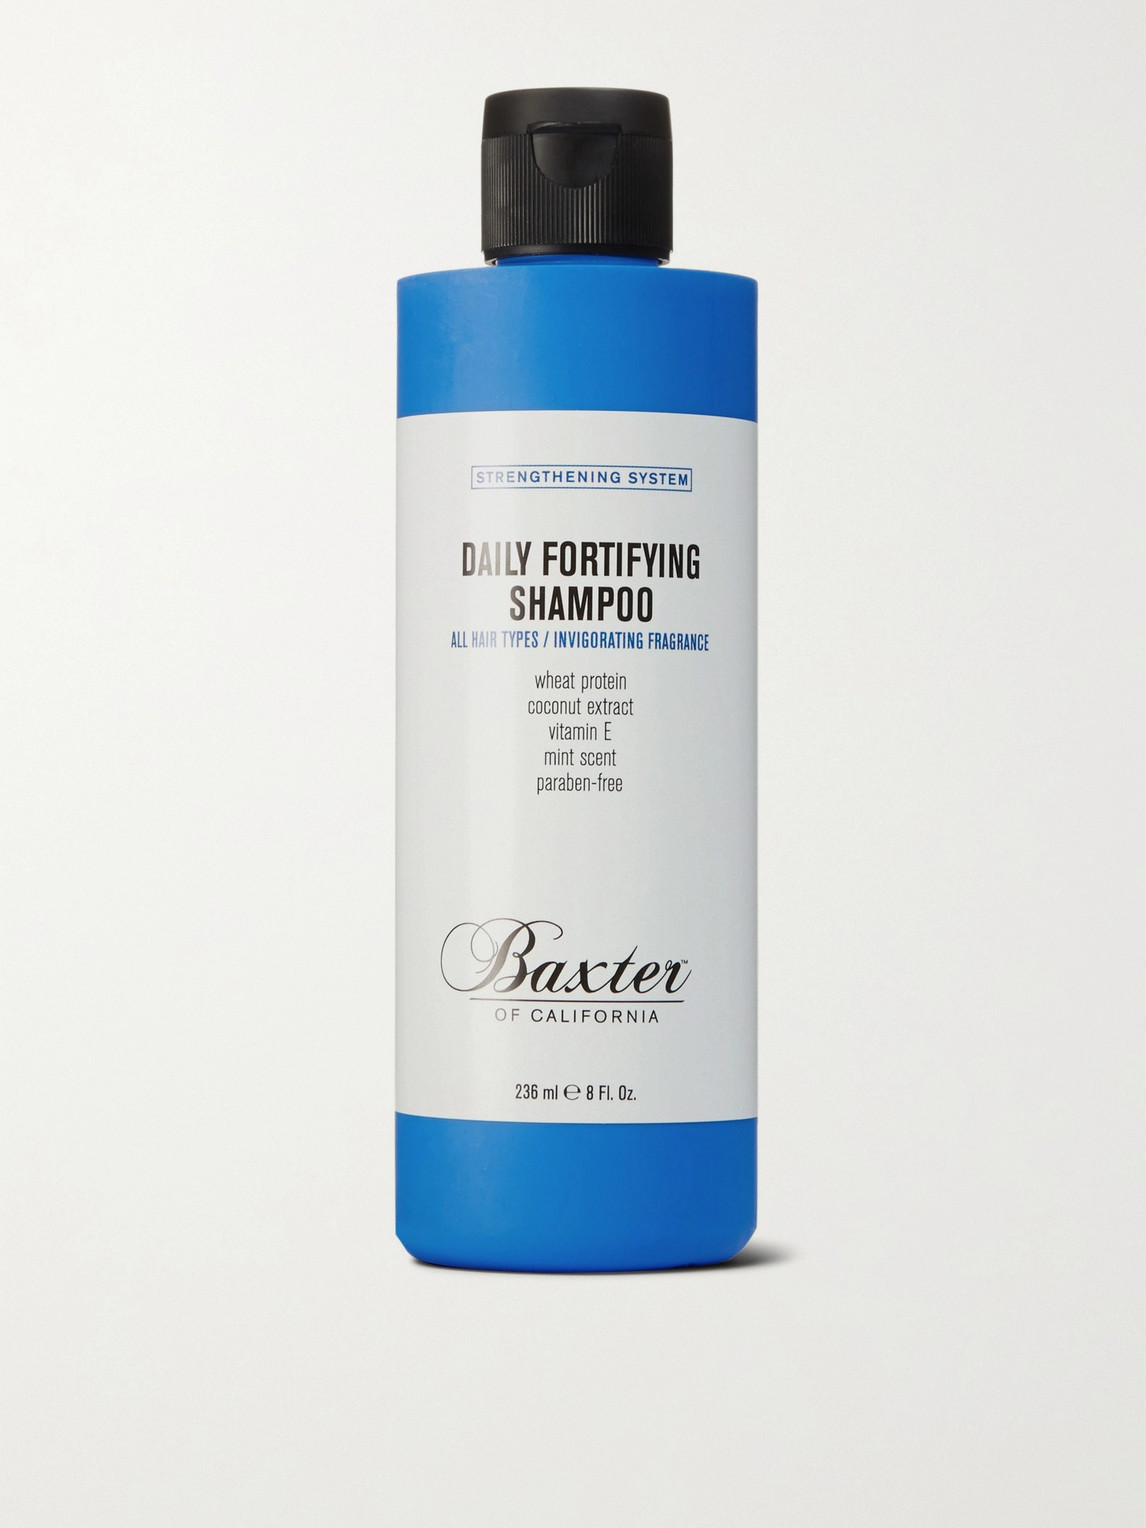 BAXTER OF CALIFORNIA DAILY FORTIFYING SHAMPOO, 236ML